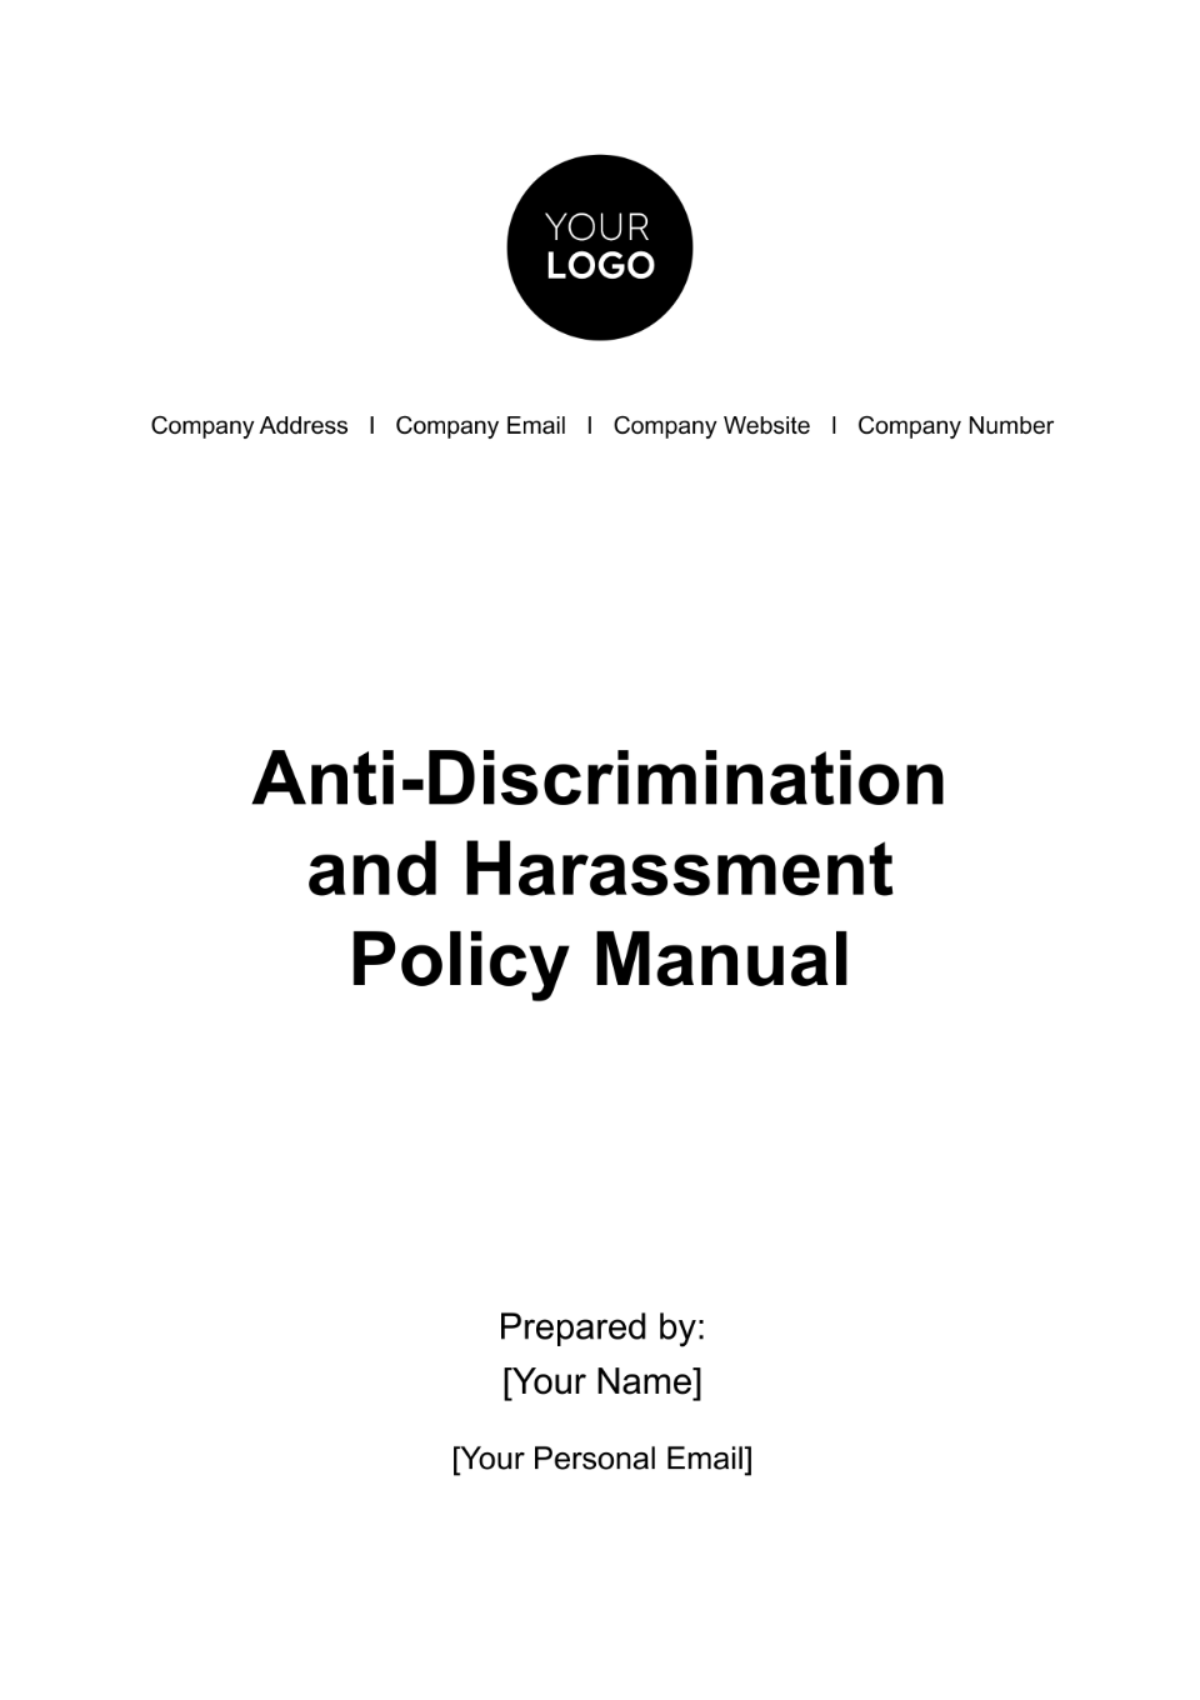 Free Anti-Discrimination and Harassment Policy Manual HR Template